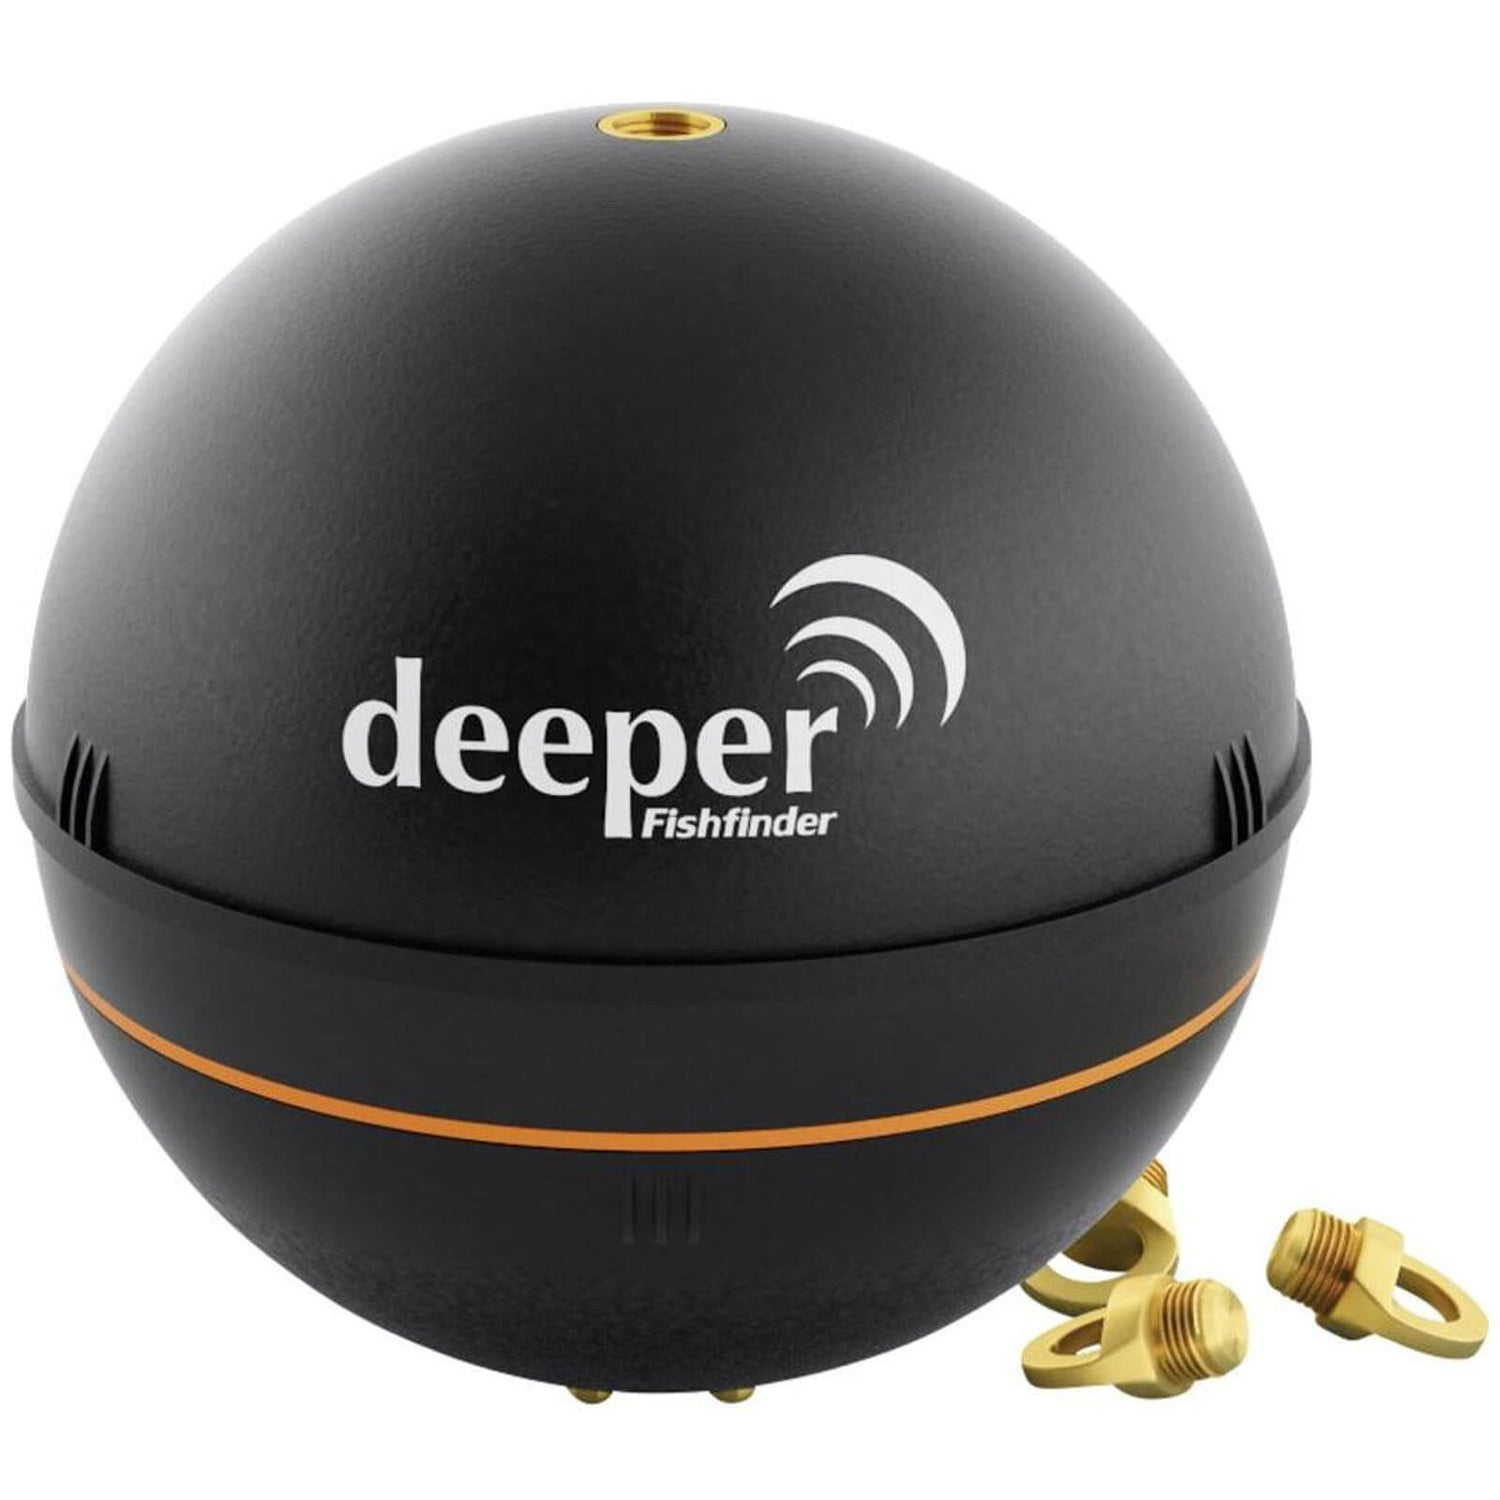 Deeper Smart Fish Finder 3.0 with App Computing